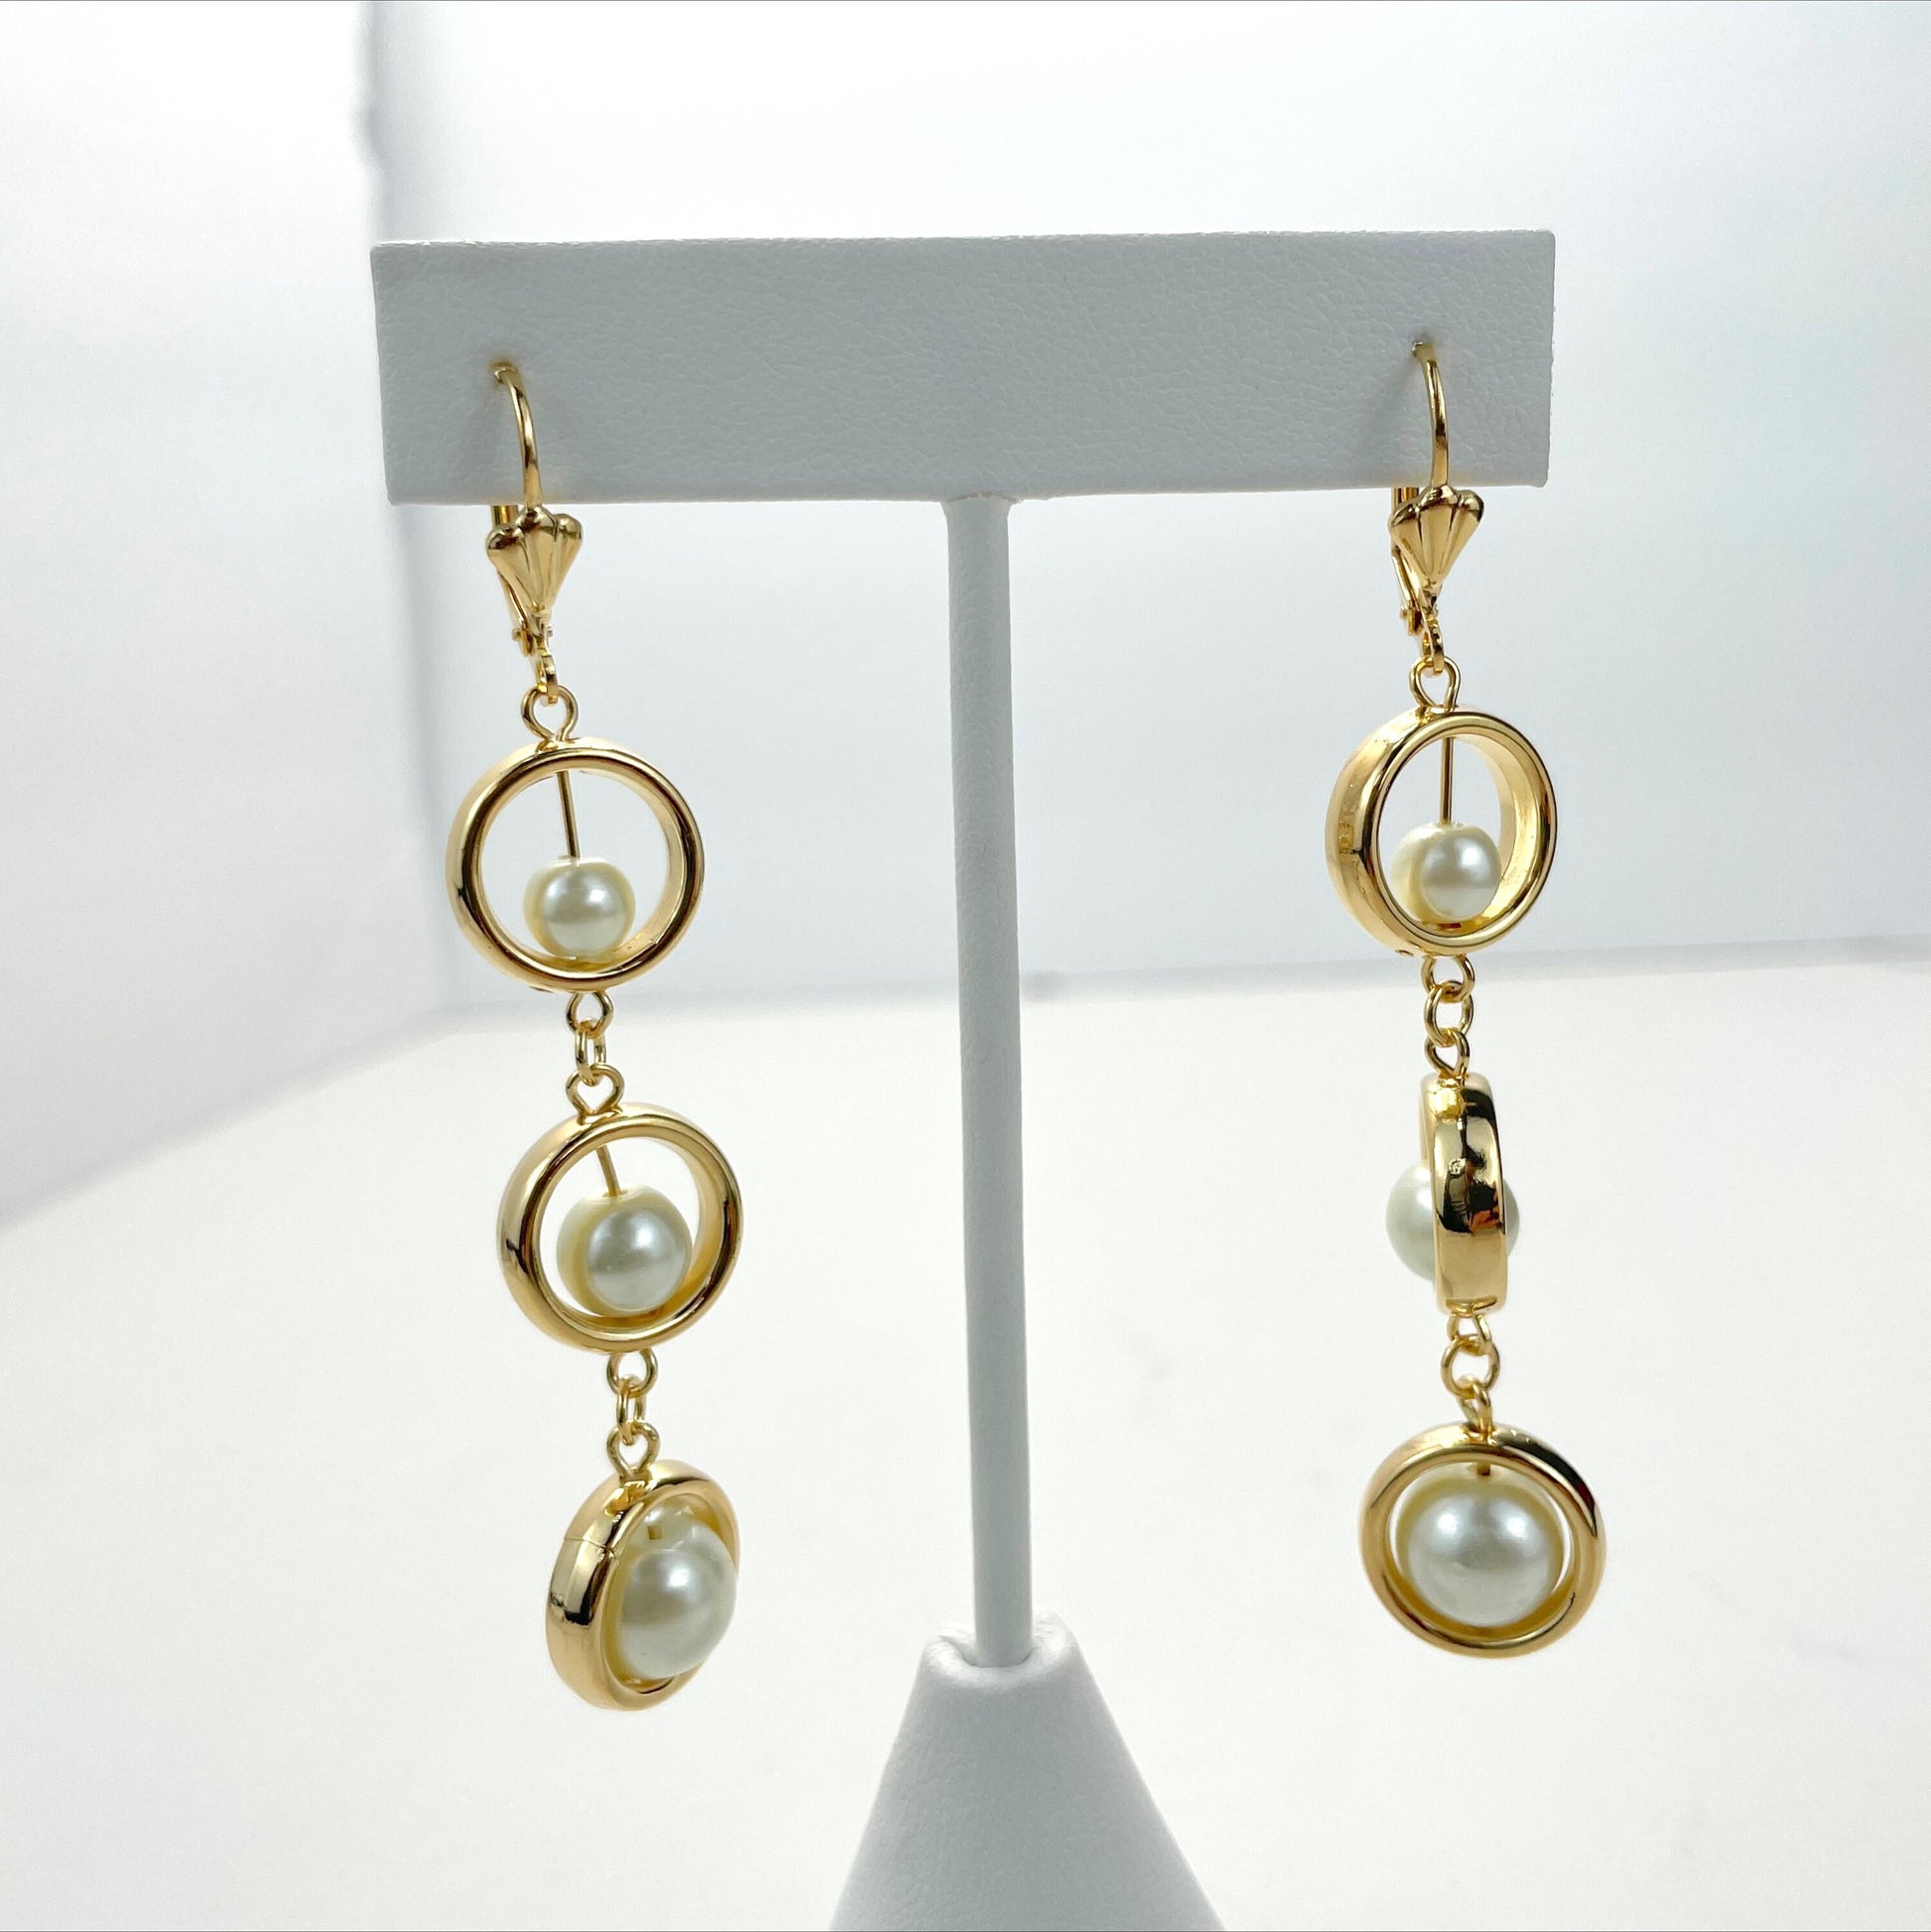 18k Gold Filled 77mm Dangle Drop Earrings with Simulated Pearls Balls Wholesale Jewelry Making Supplies